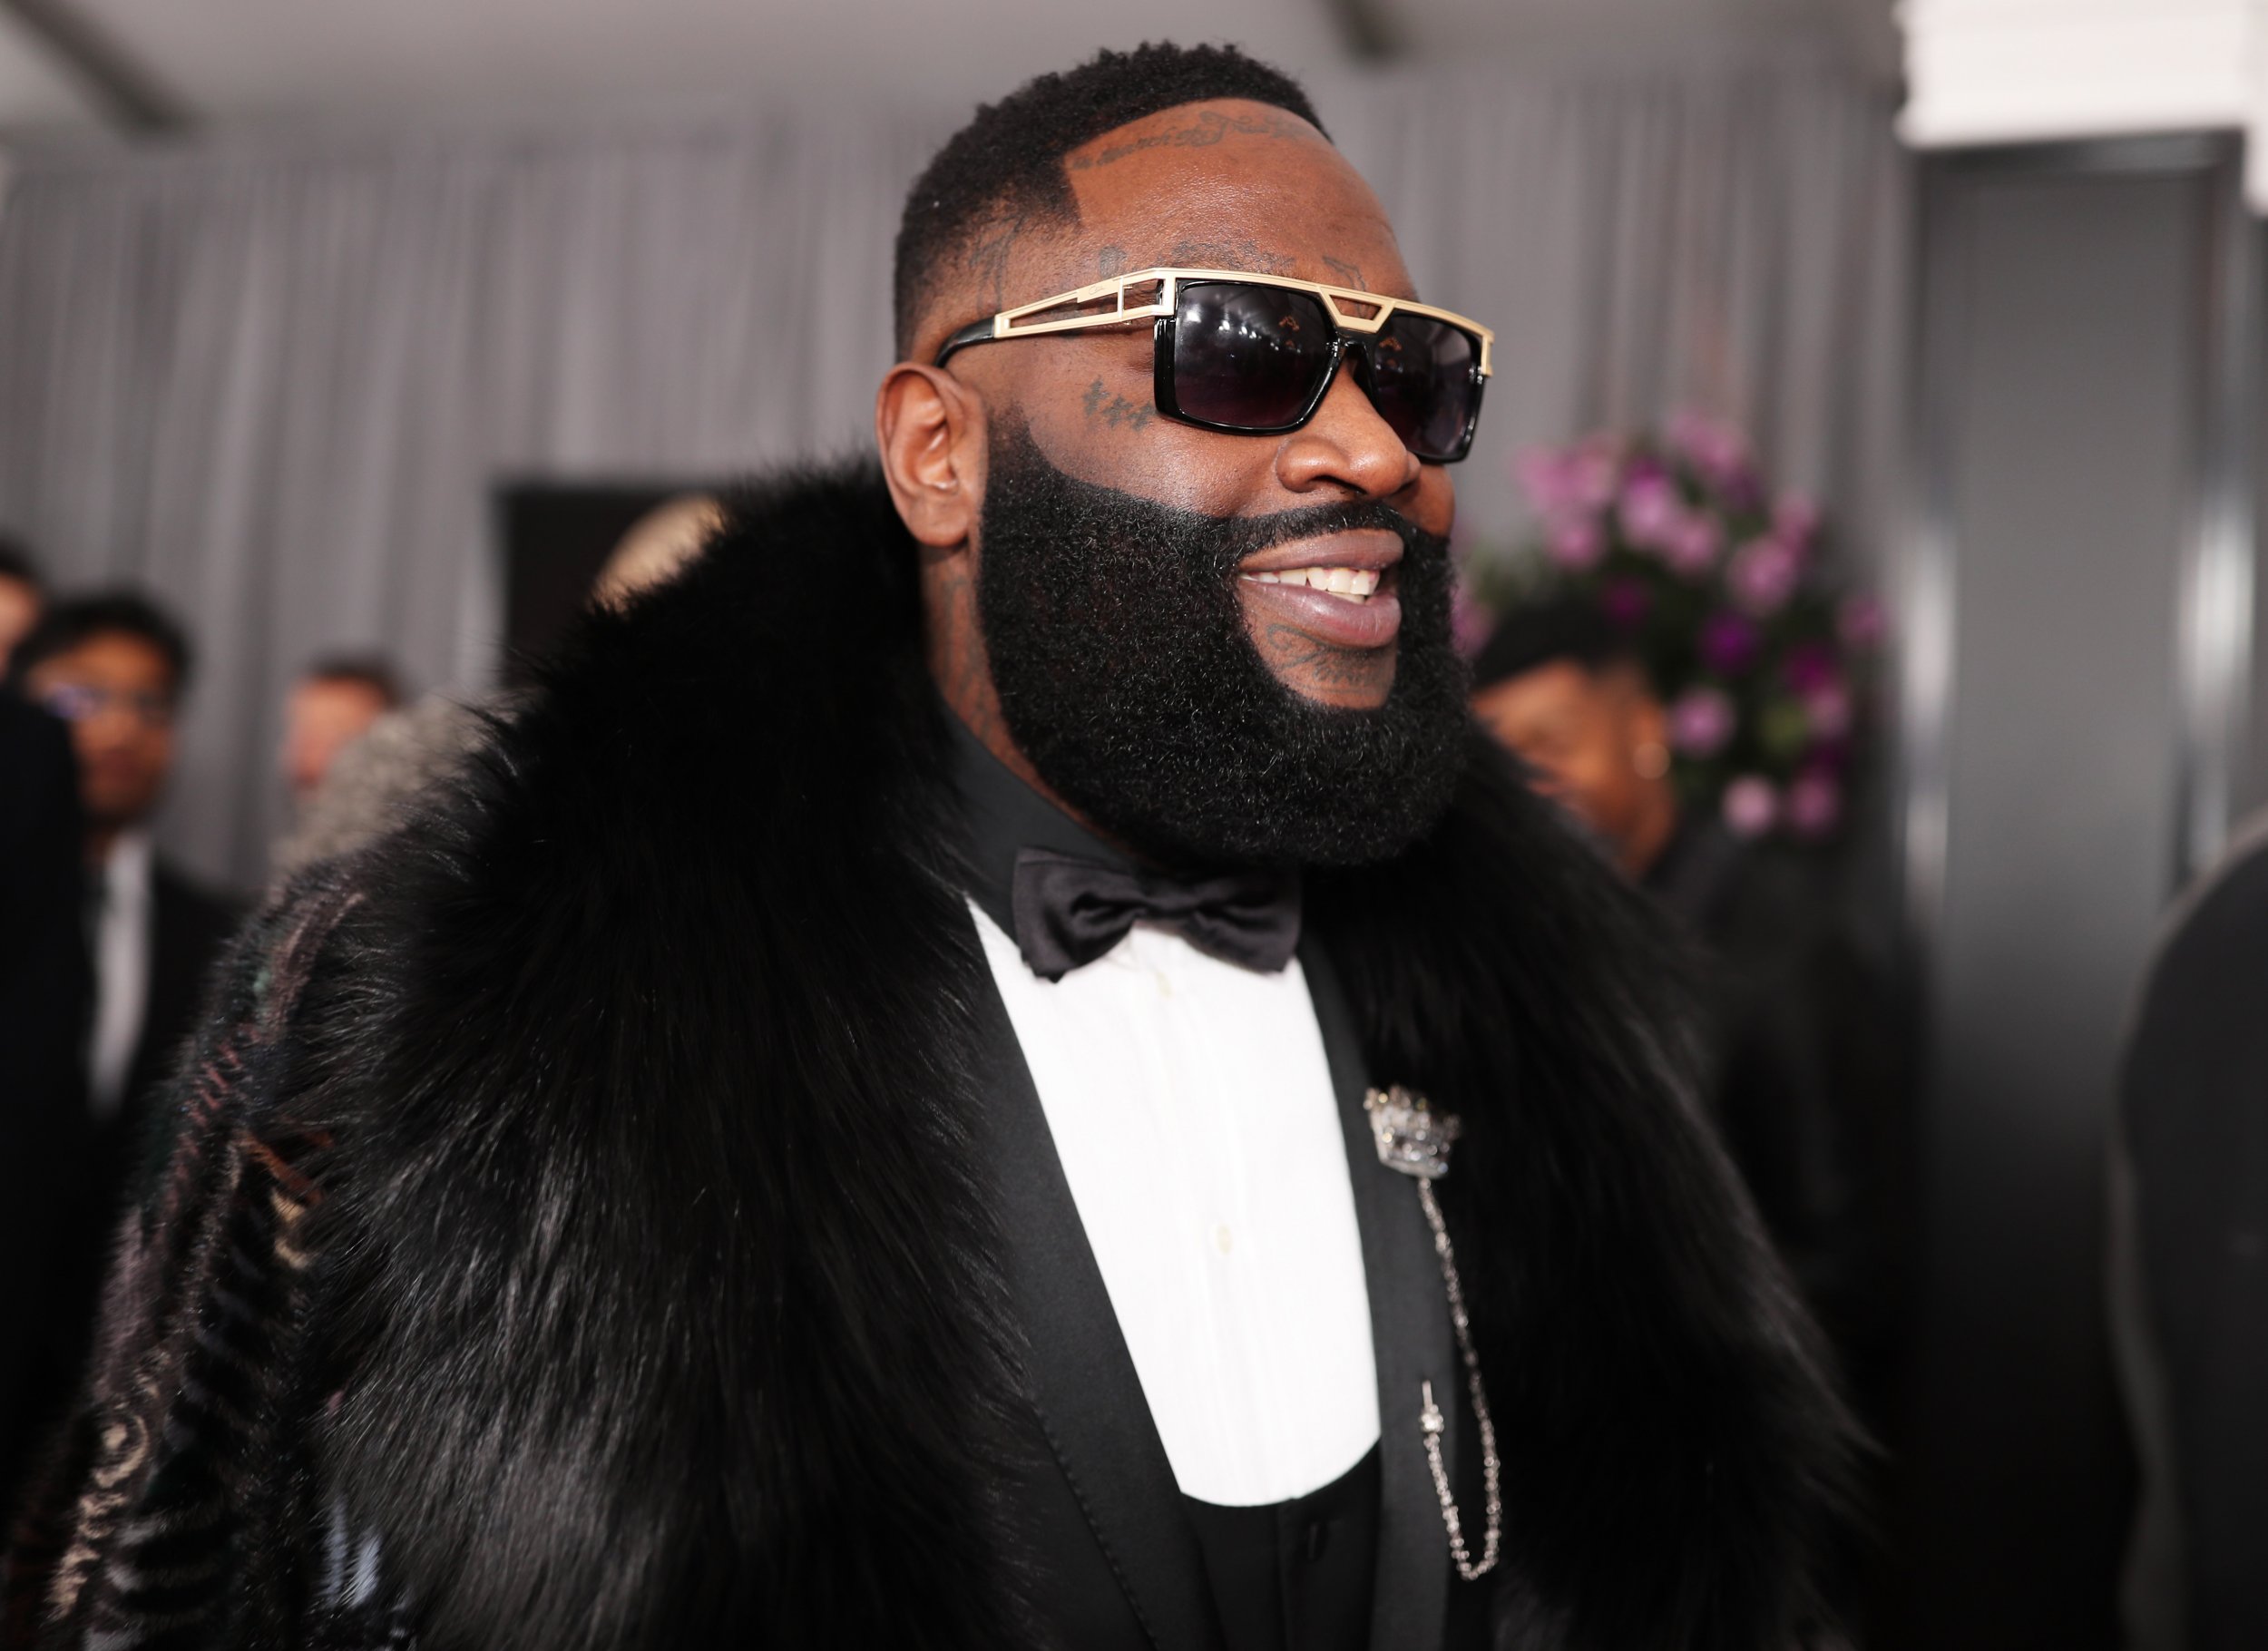 Rick Ross on Life Support at Miami Hospital: Report - Newsweek